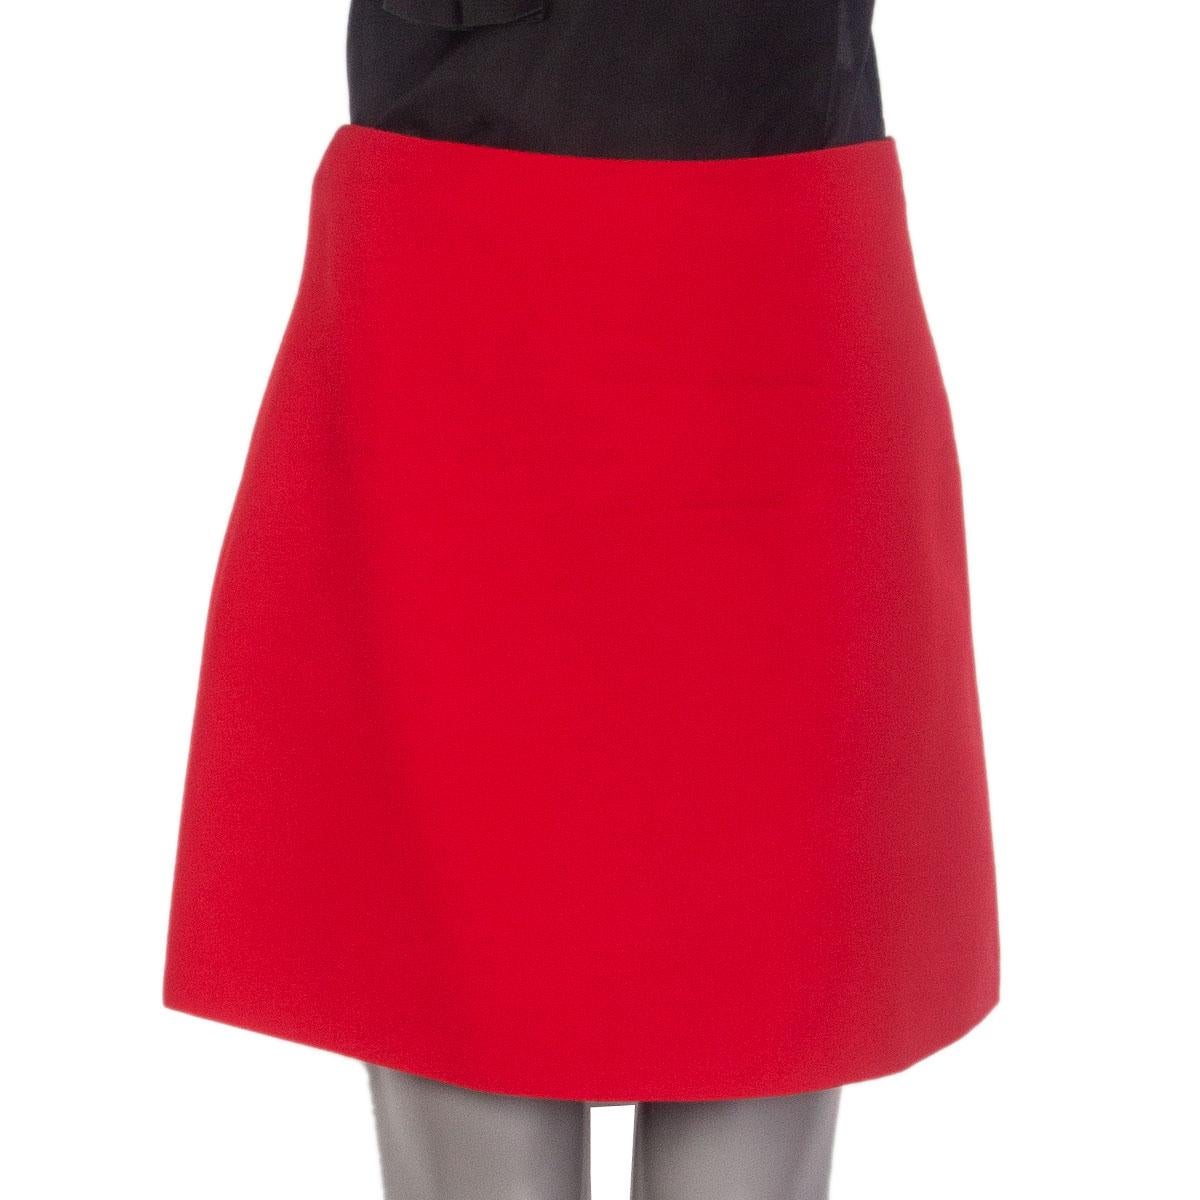 100% authentic Valentino A Line skirt in red wool (68%) and silk (32%). Closes with a hook and a concealed zipper on the side. Has been worn and is in excellent condition.

Measurements
Tag Size	40
Size	S
Waist From	72cm (28.1in)
Hips From	96cm